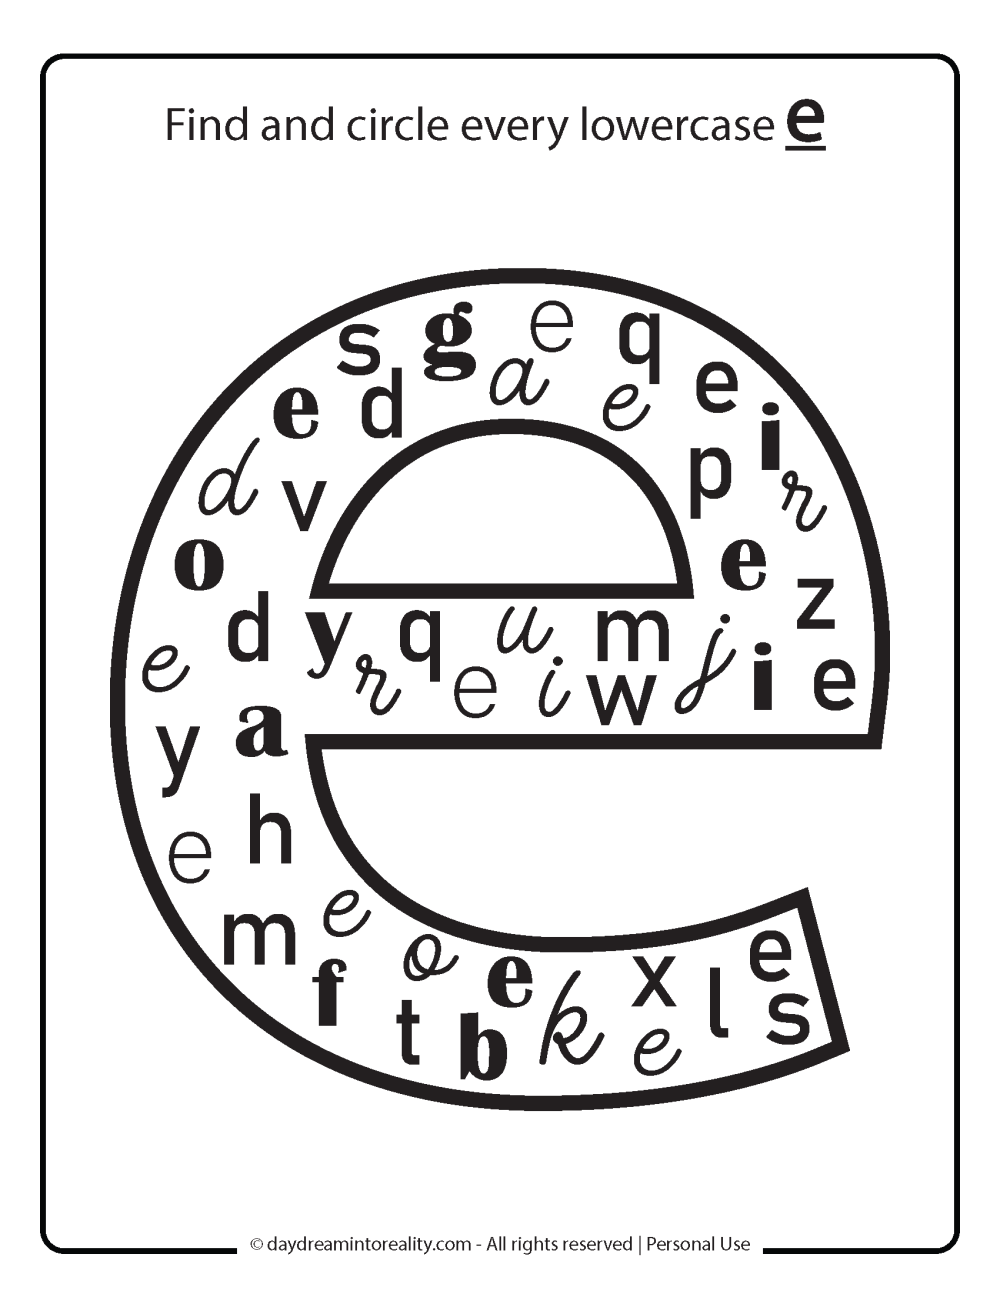 Letter E worksheet free printables - find and circle all lowercase e